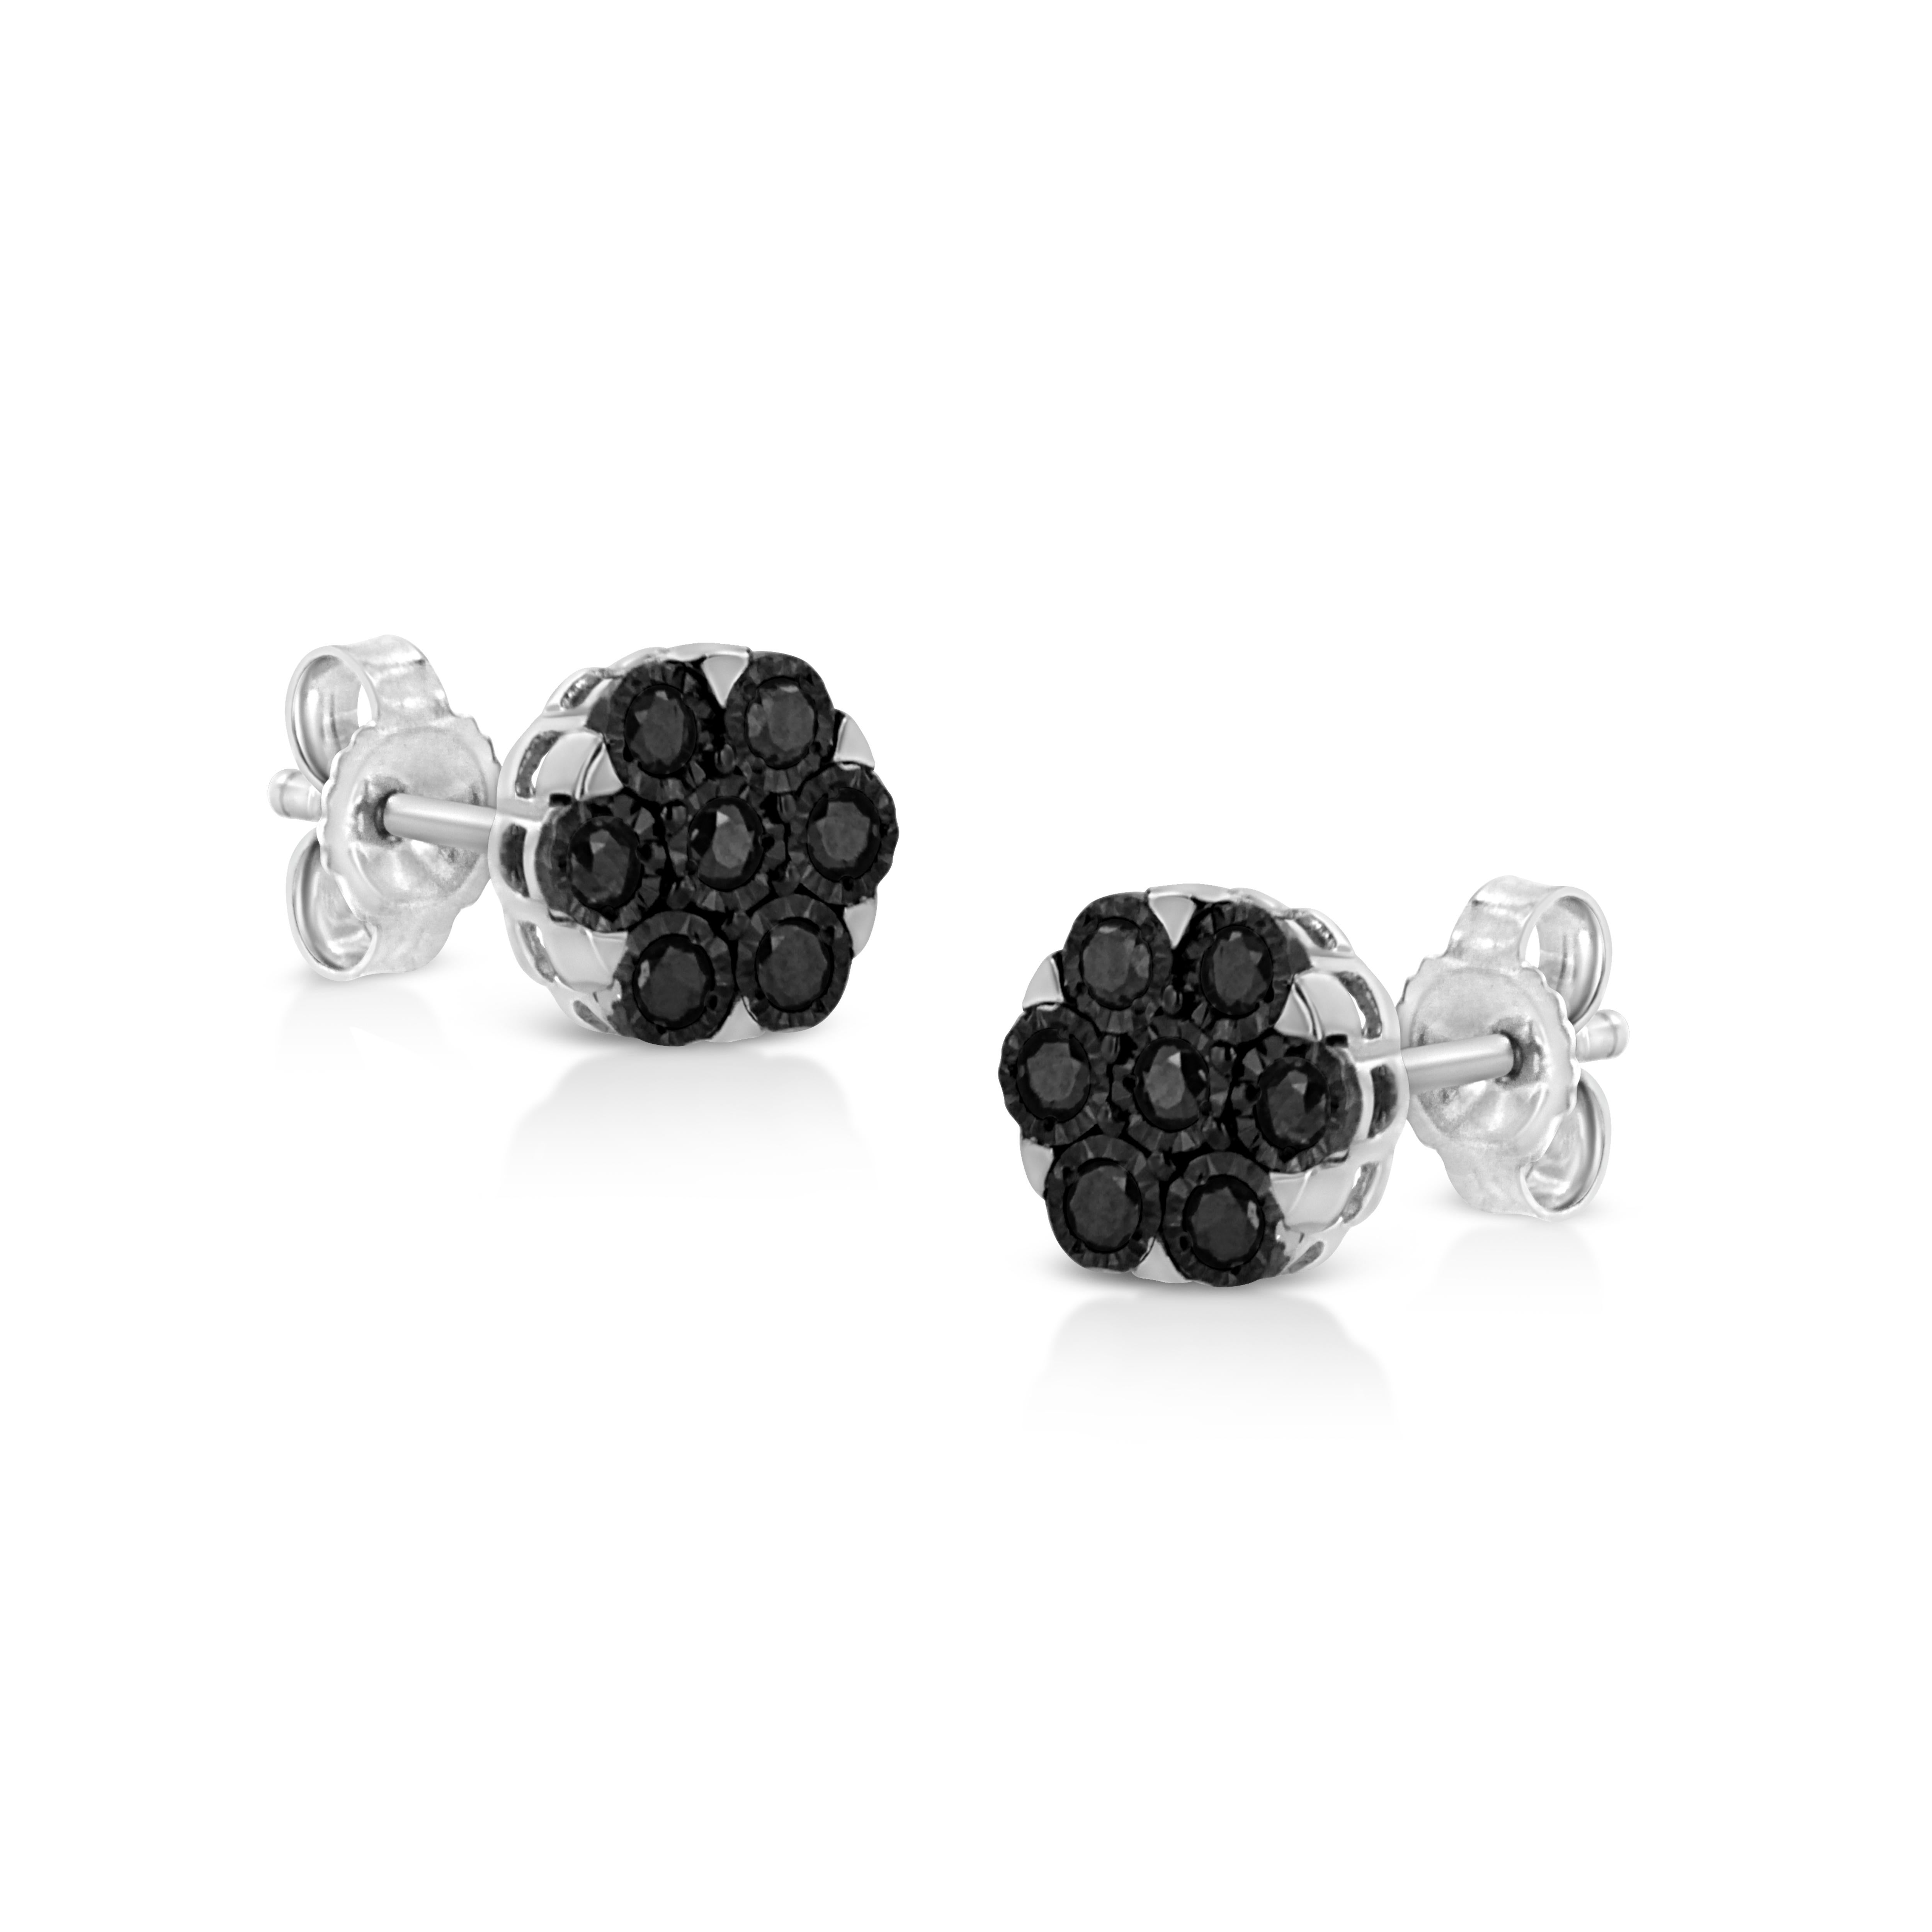 You will fall in love with these classic cluster stud earrings. A must have for any serious jewelry collection, these .925 sterling earrings boast 0.25 carat total weight of treated black diamonds with seven stones each. The earrings are floral